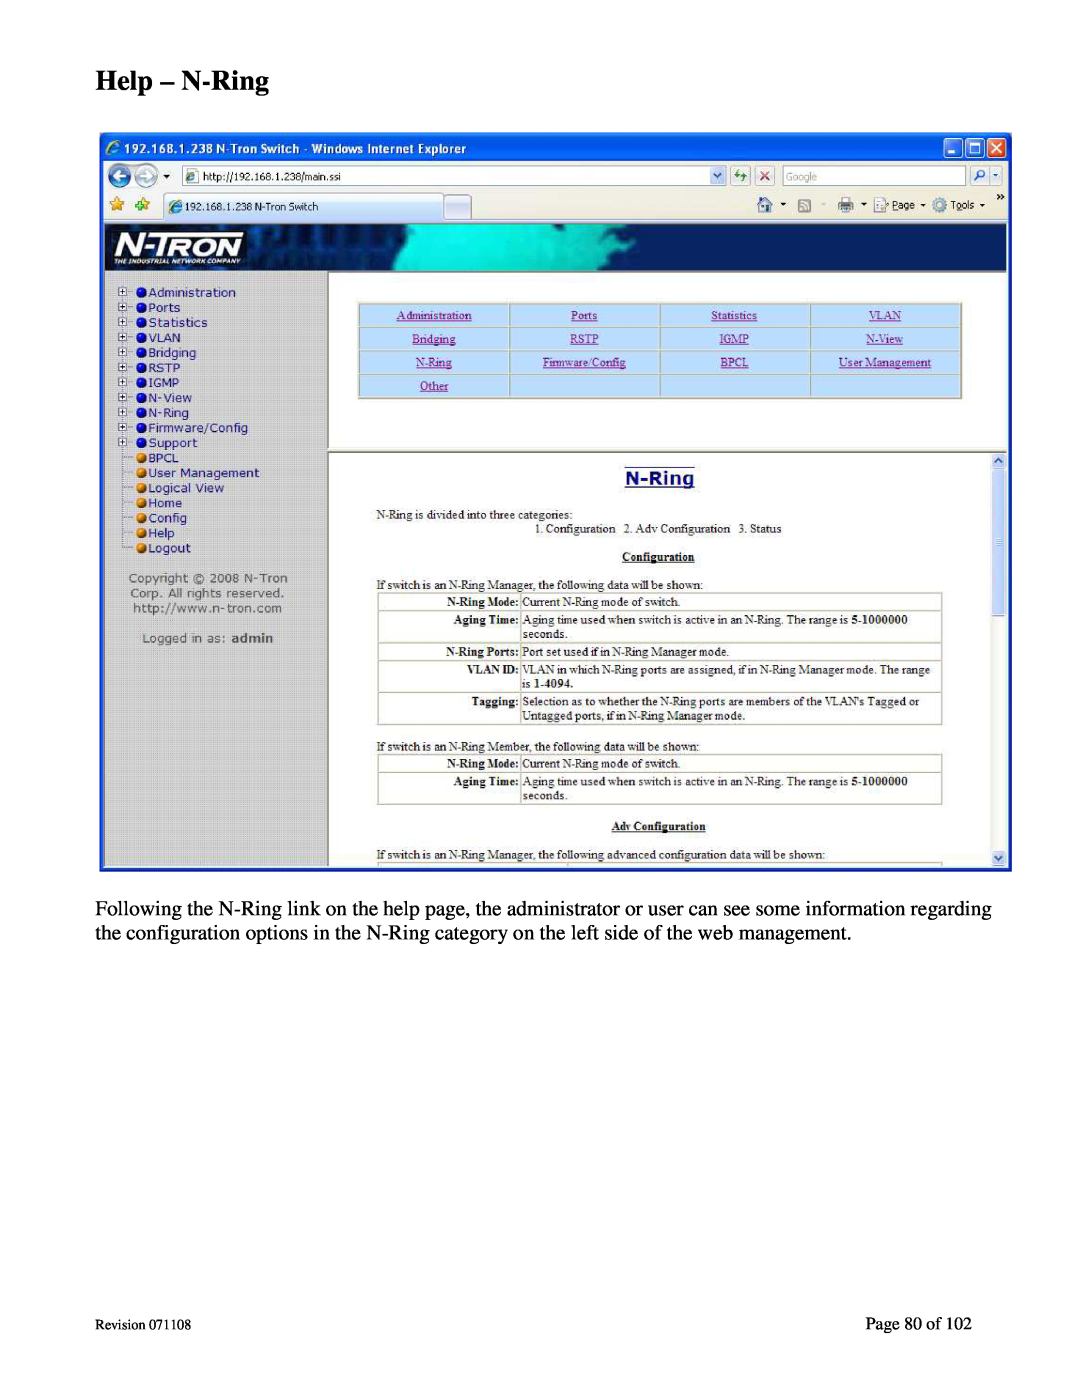 N-Tron 708M12 user manual Help - N-Ring, Page 80 of, Revision 